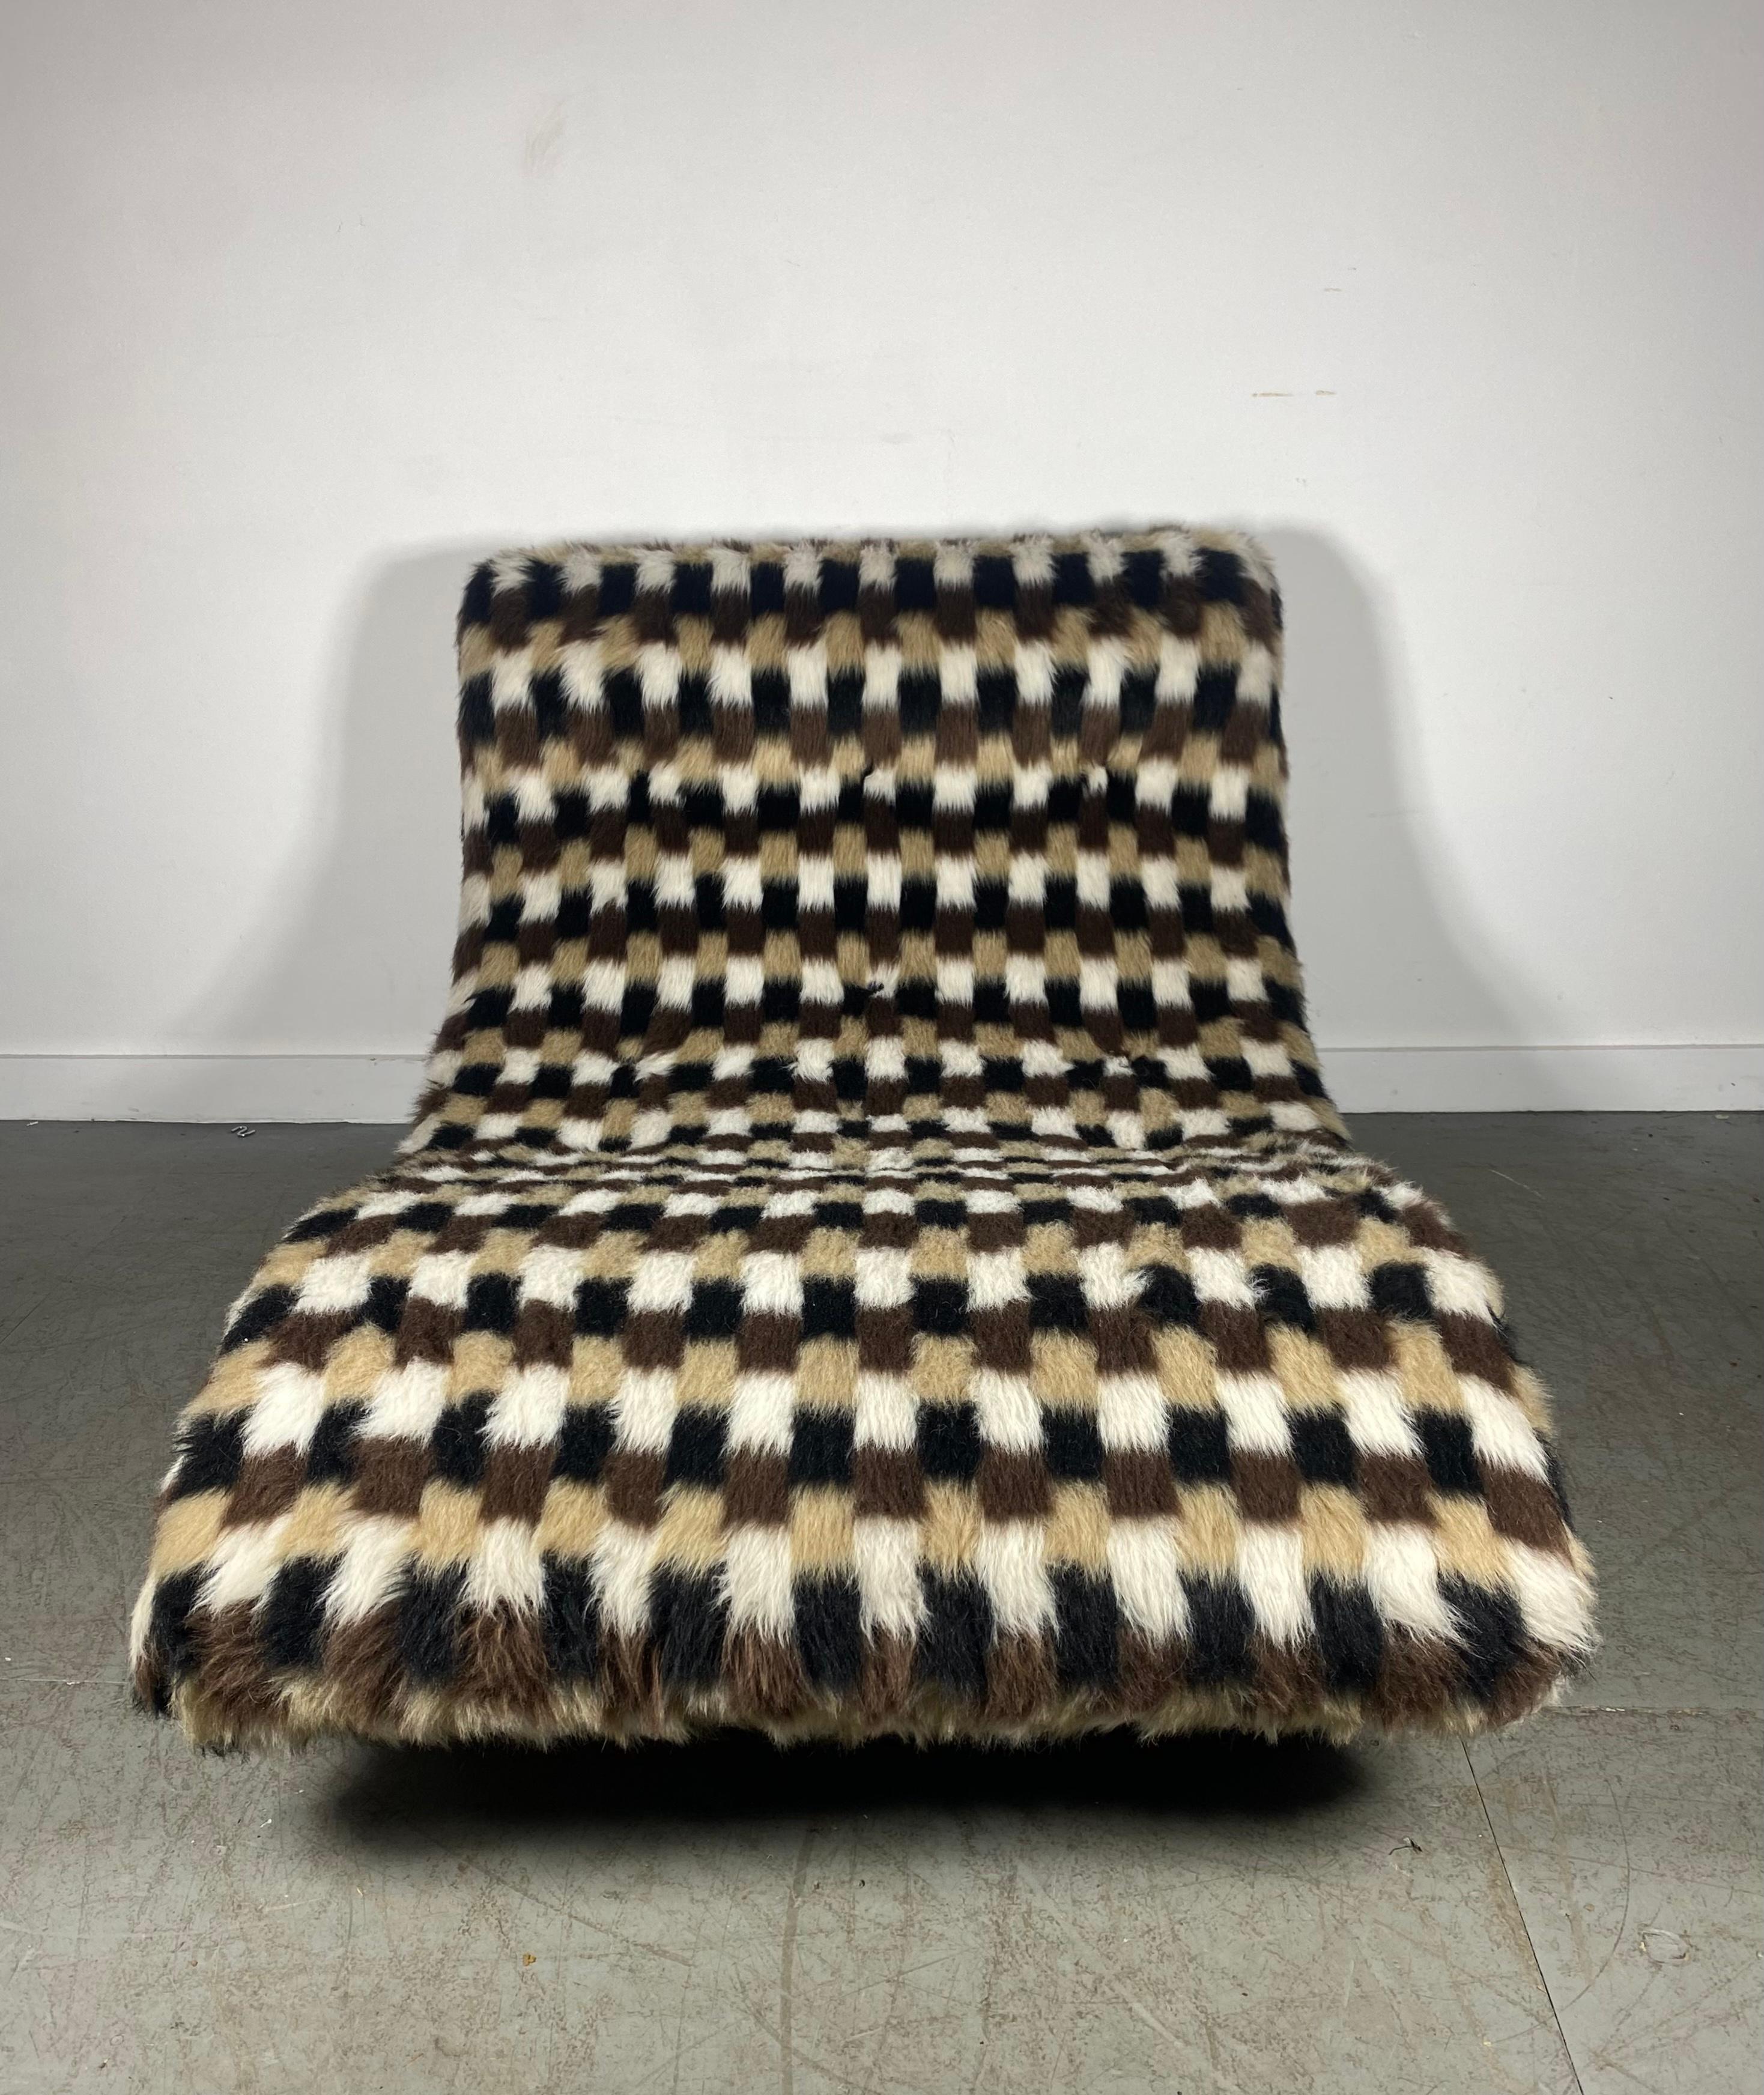 Mid-20th Century Modernist Adrian Pearsall Wave Chaise Lounge in original geometric fabric